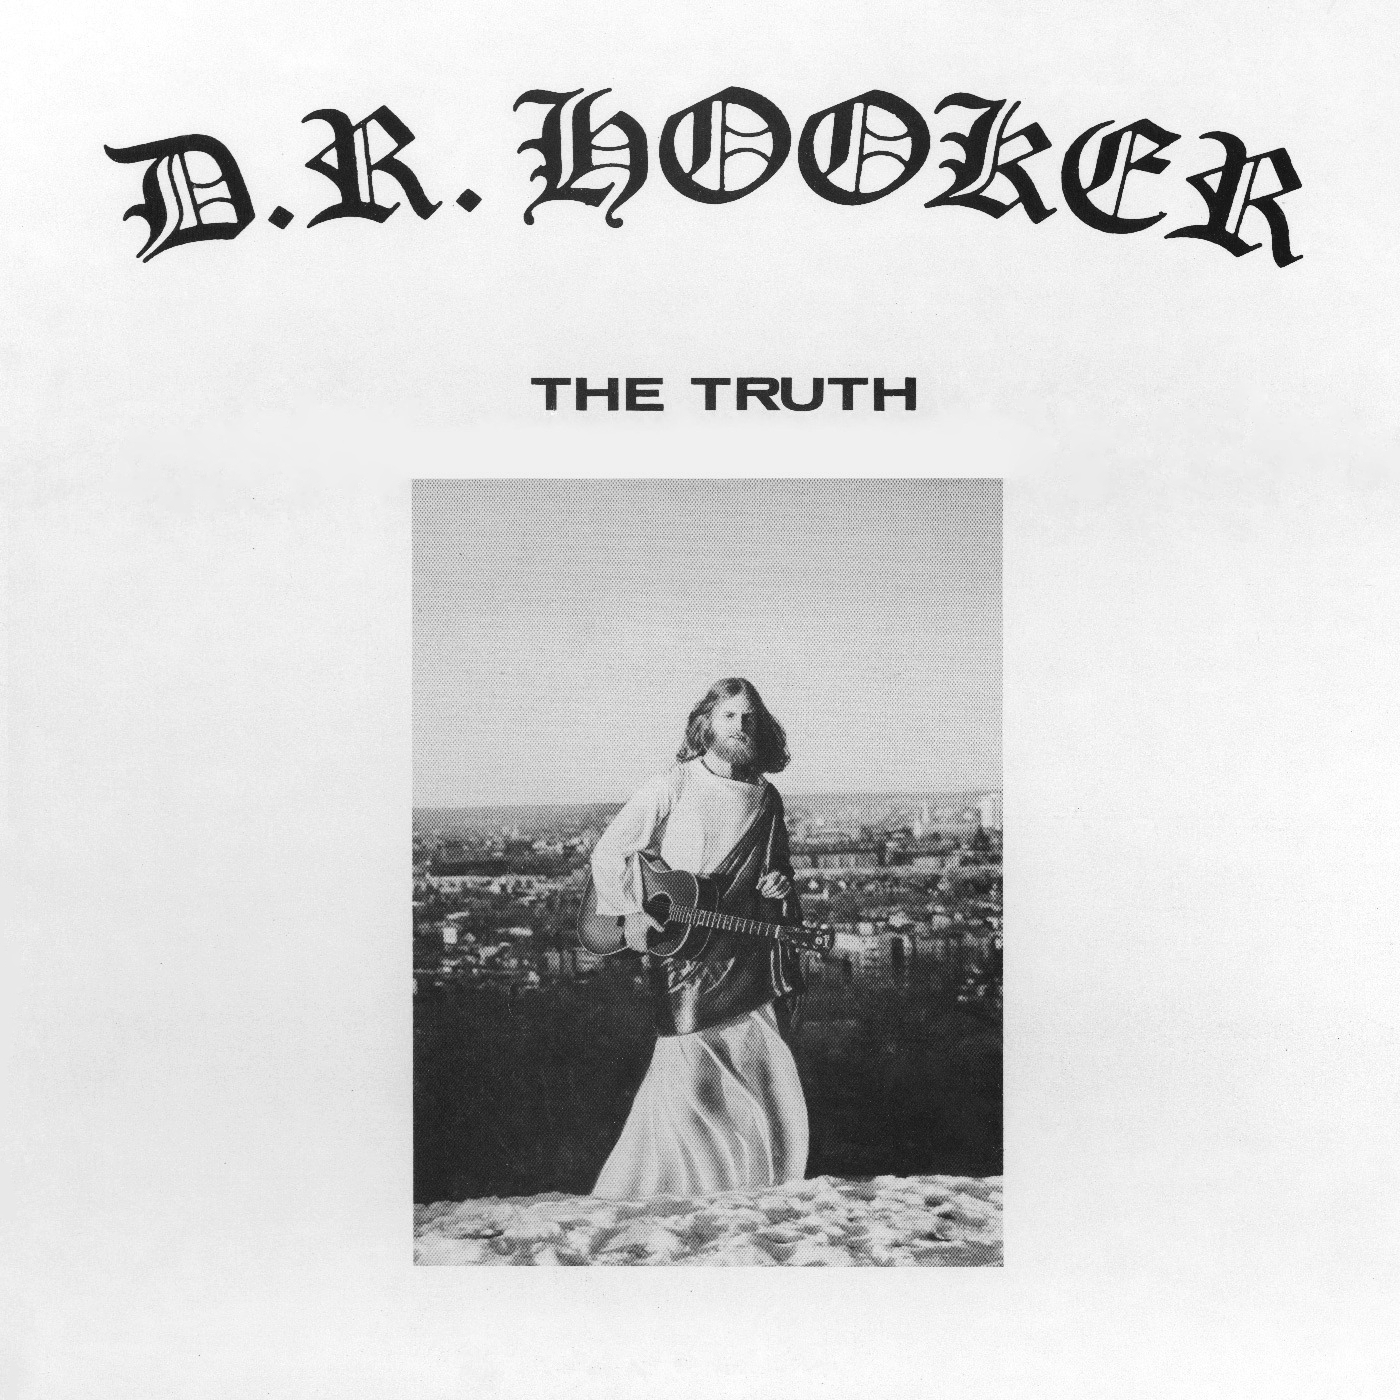 D.R. HOOKER - THE TRUTH